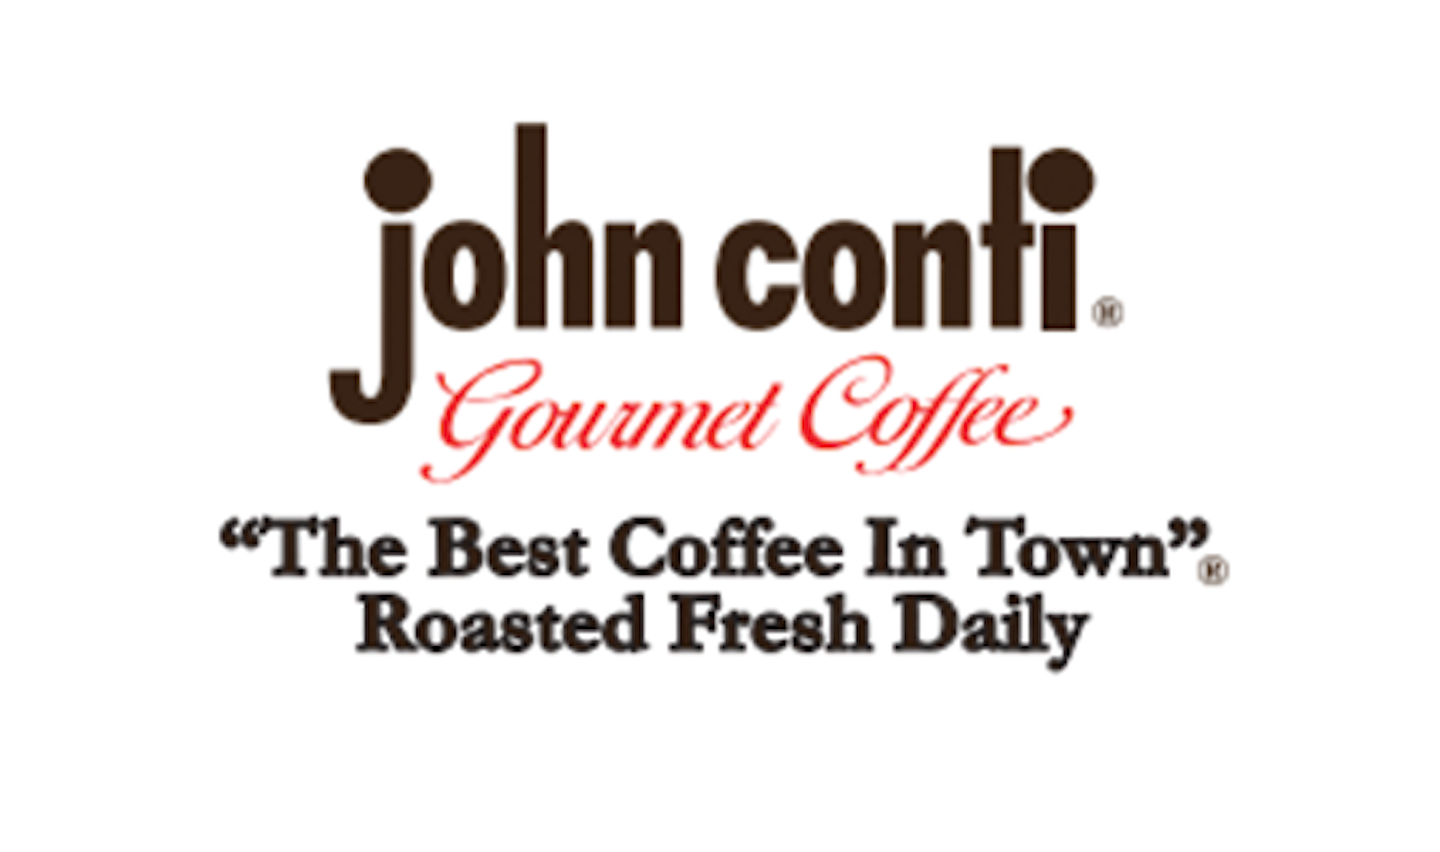 Coffee Company Founder John Conti Retires, Sells Business To Canteen Of